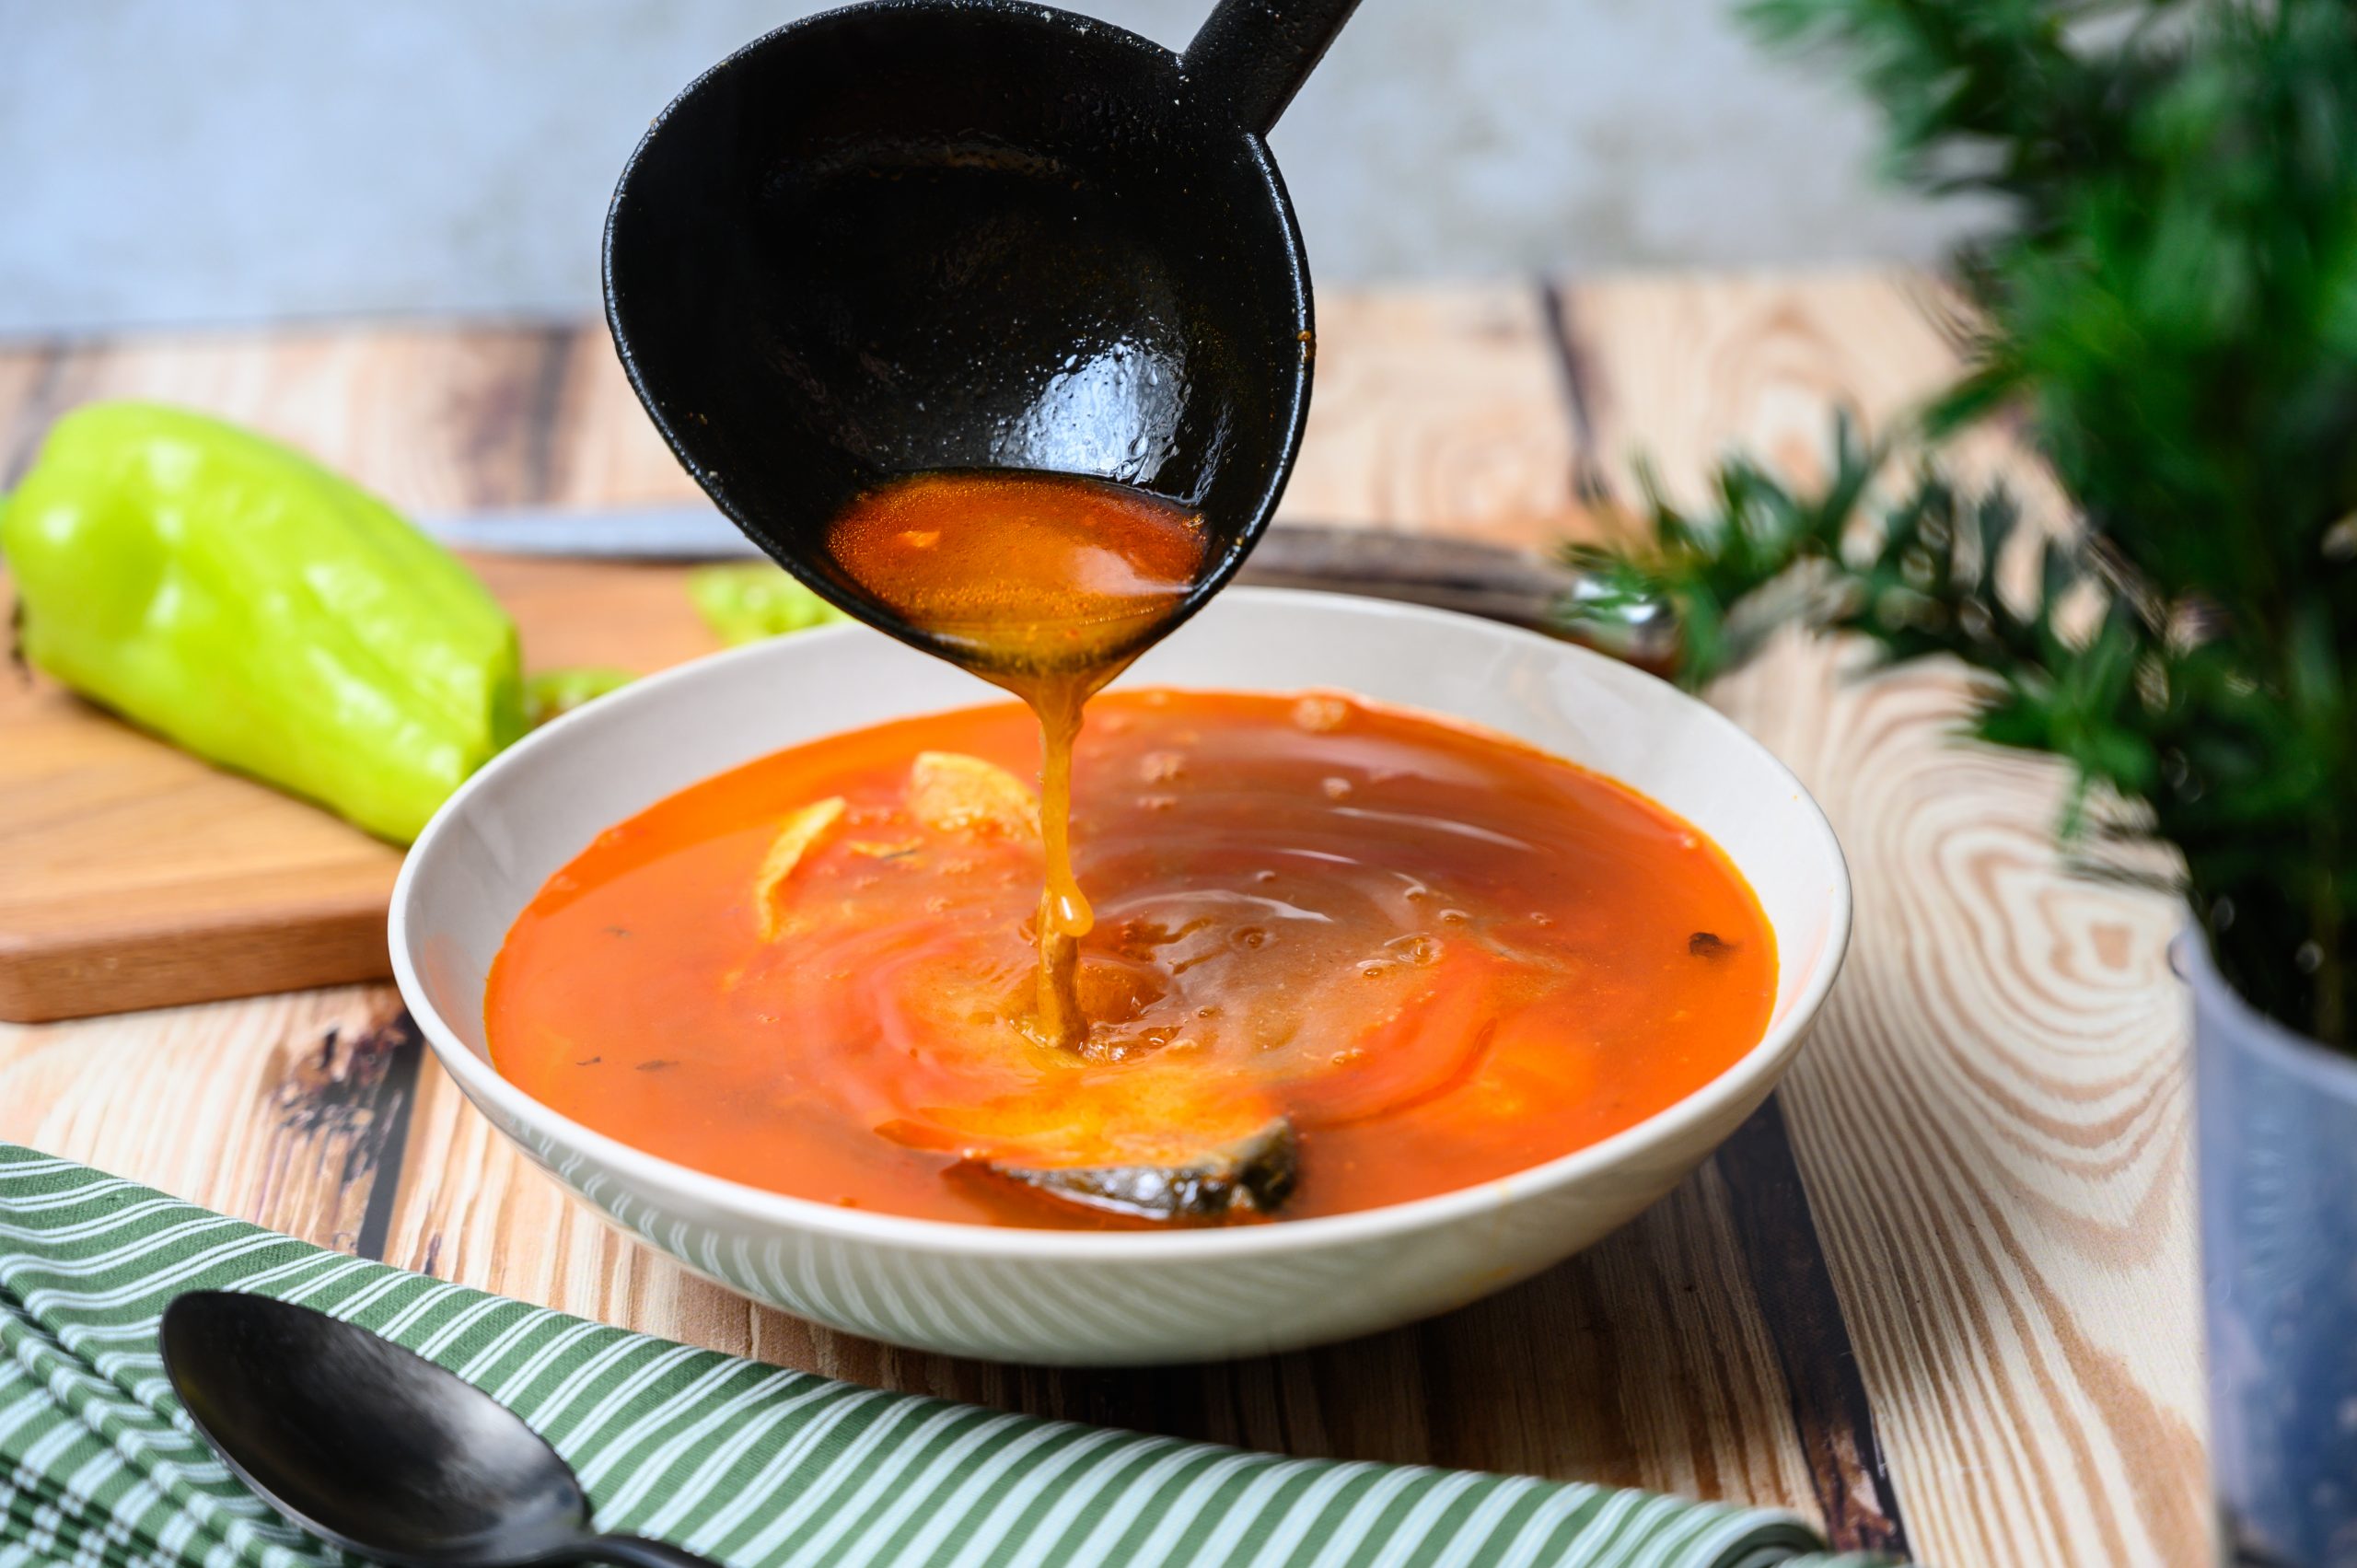 The Christmas Dish Dividing Hungary: Fisherman Soup - With Recipe!